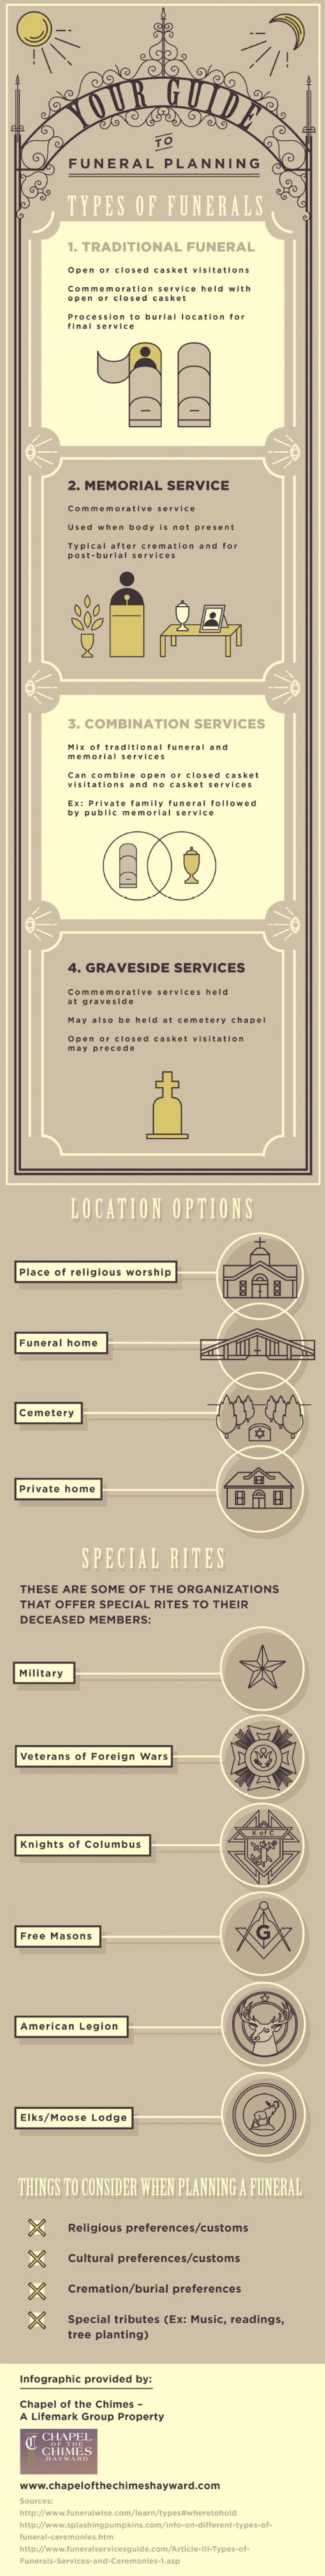 free funeral pre planning guide